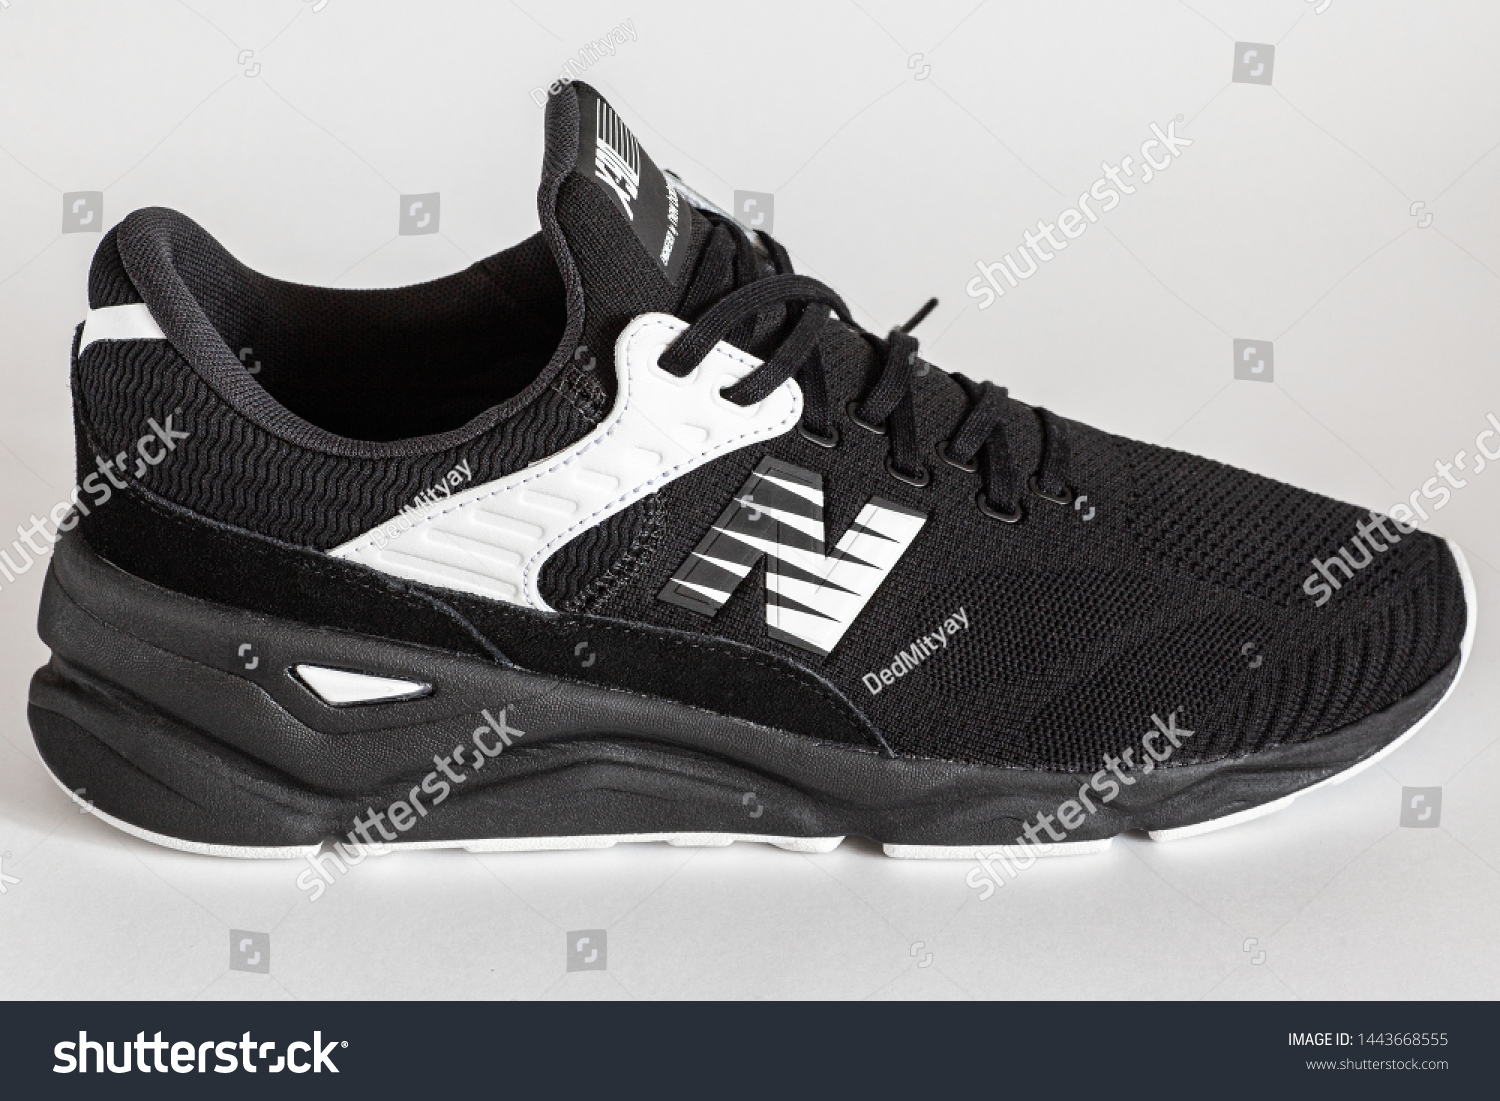 new balance manufactures its shoes in 